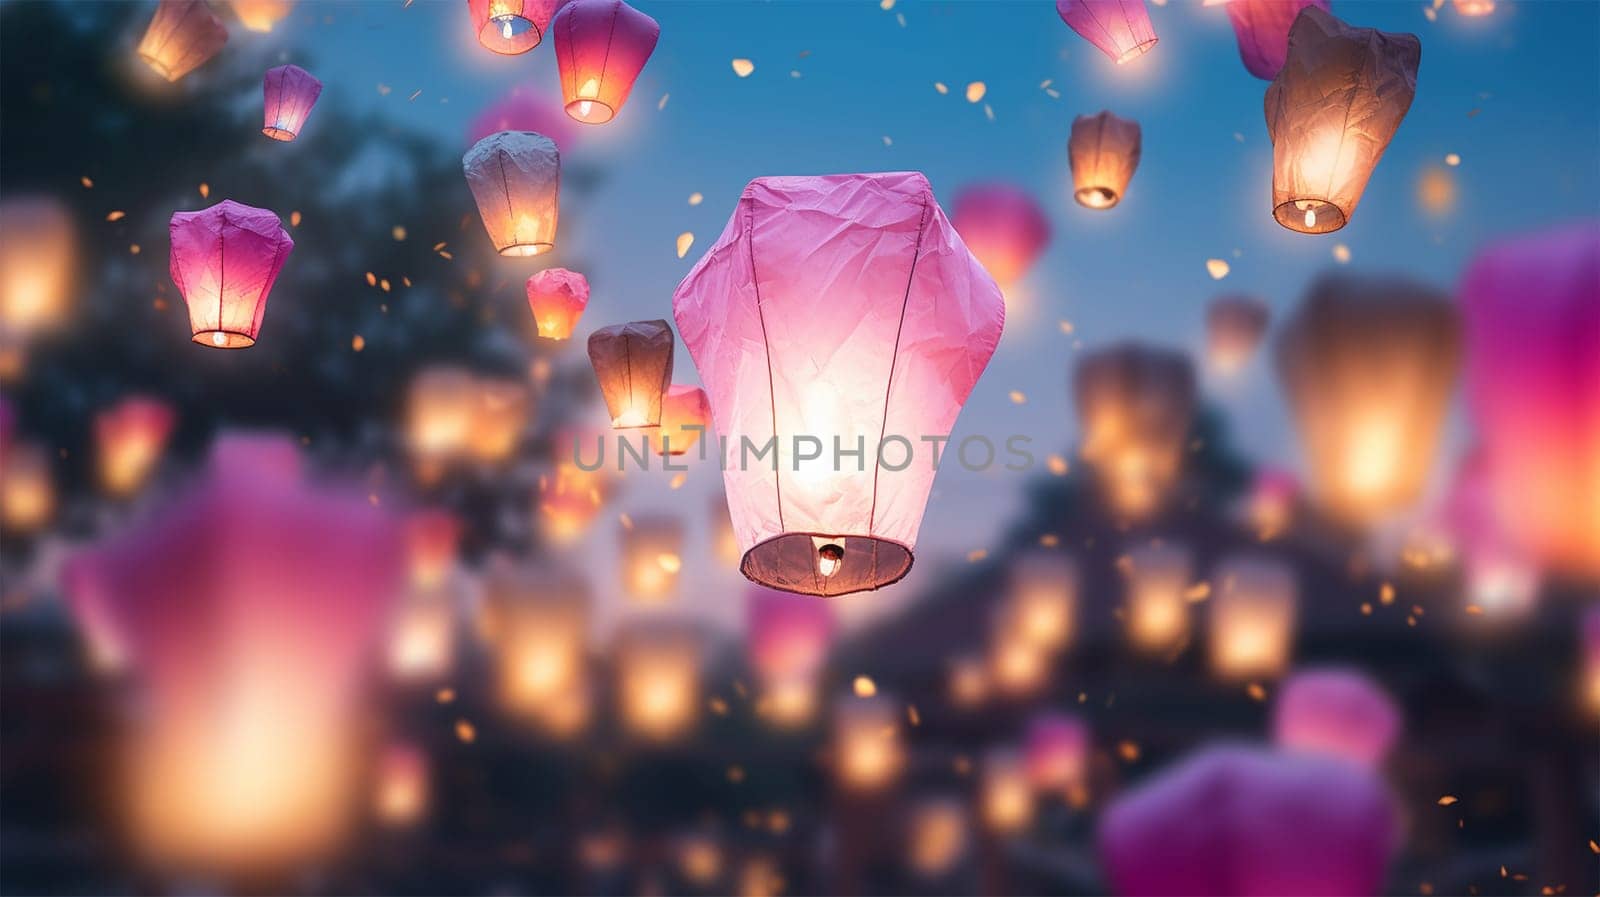 Lantern Festival background, Shangyuan Festival China. Magical flying lanterns in the colorful sky. beautiful lights sparkling. Chinese festive background by Annebel146